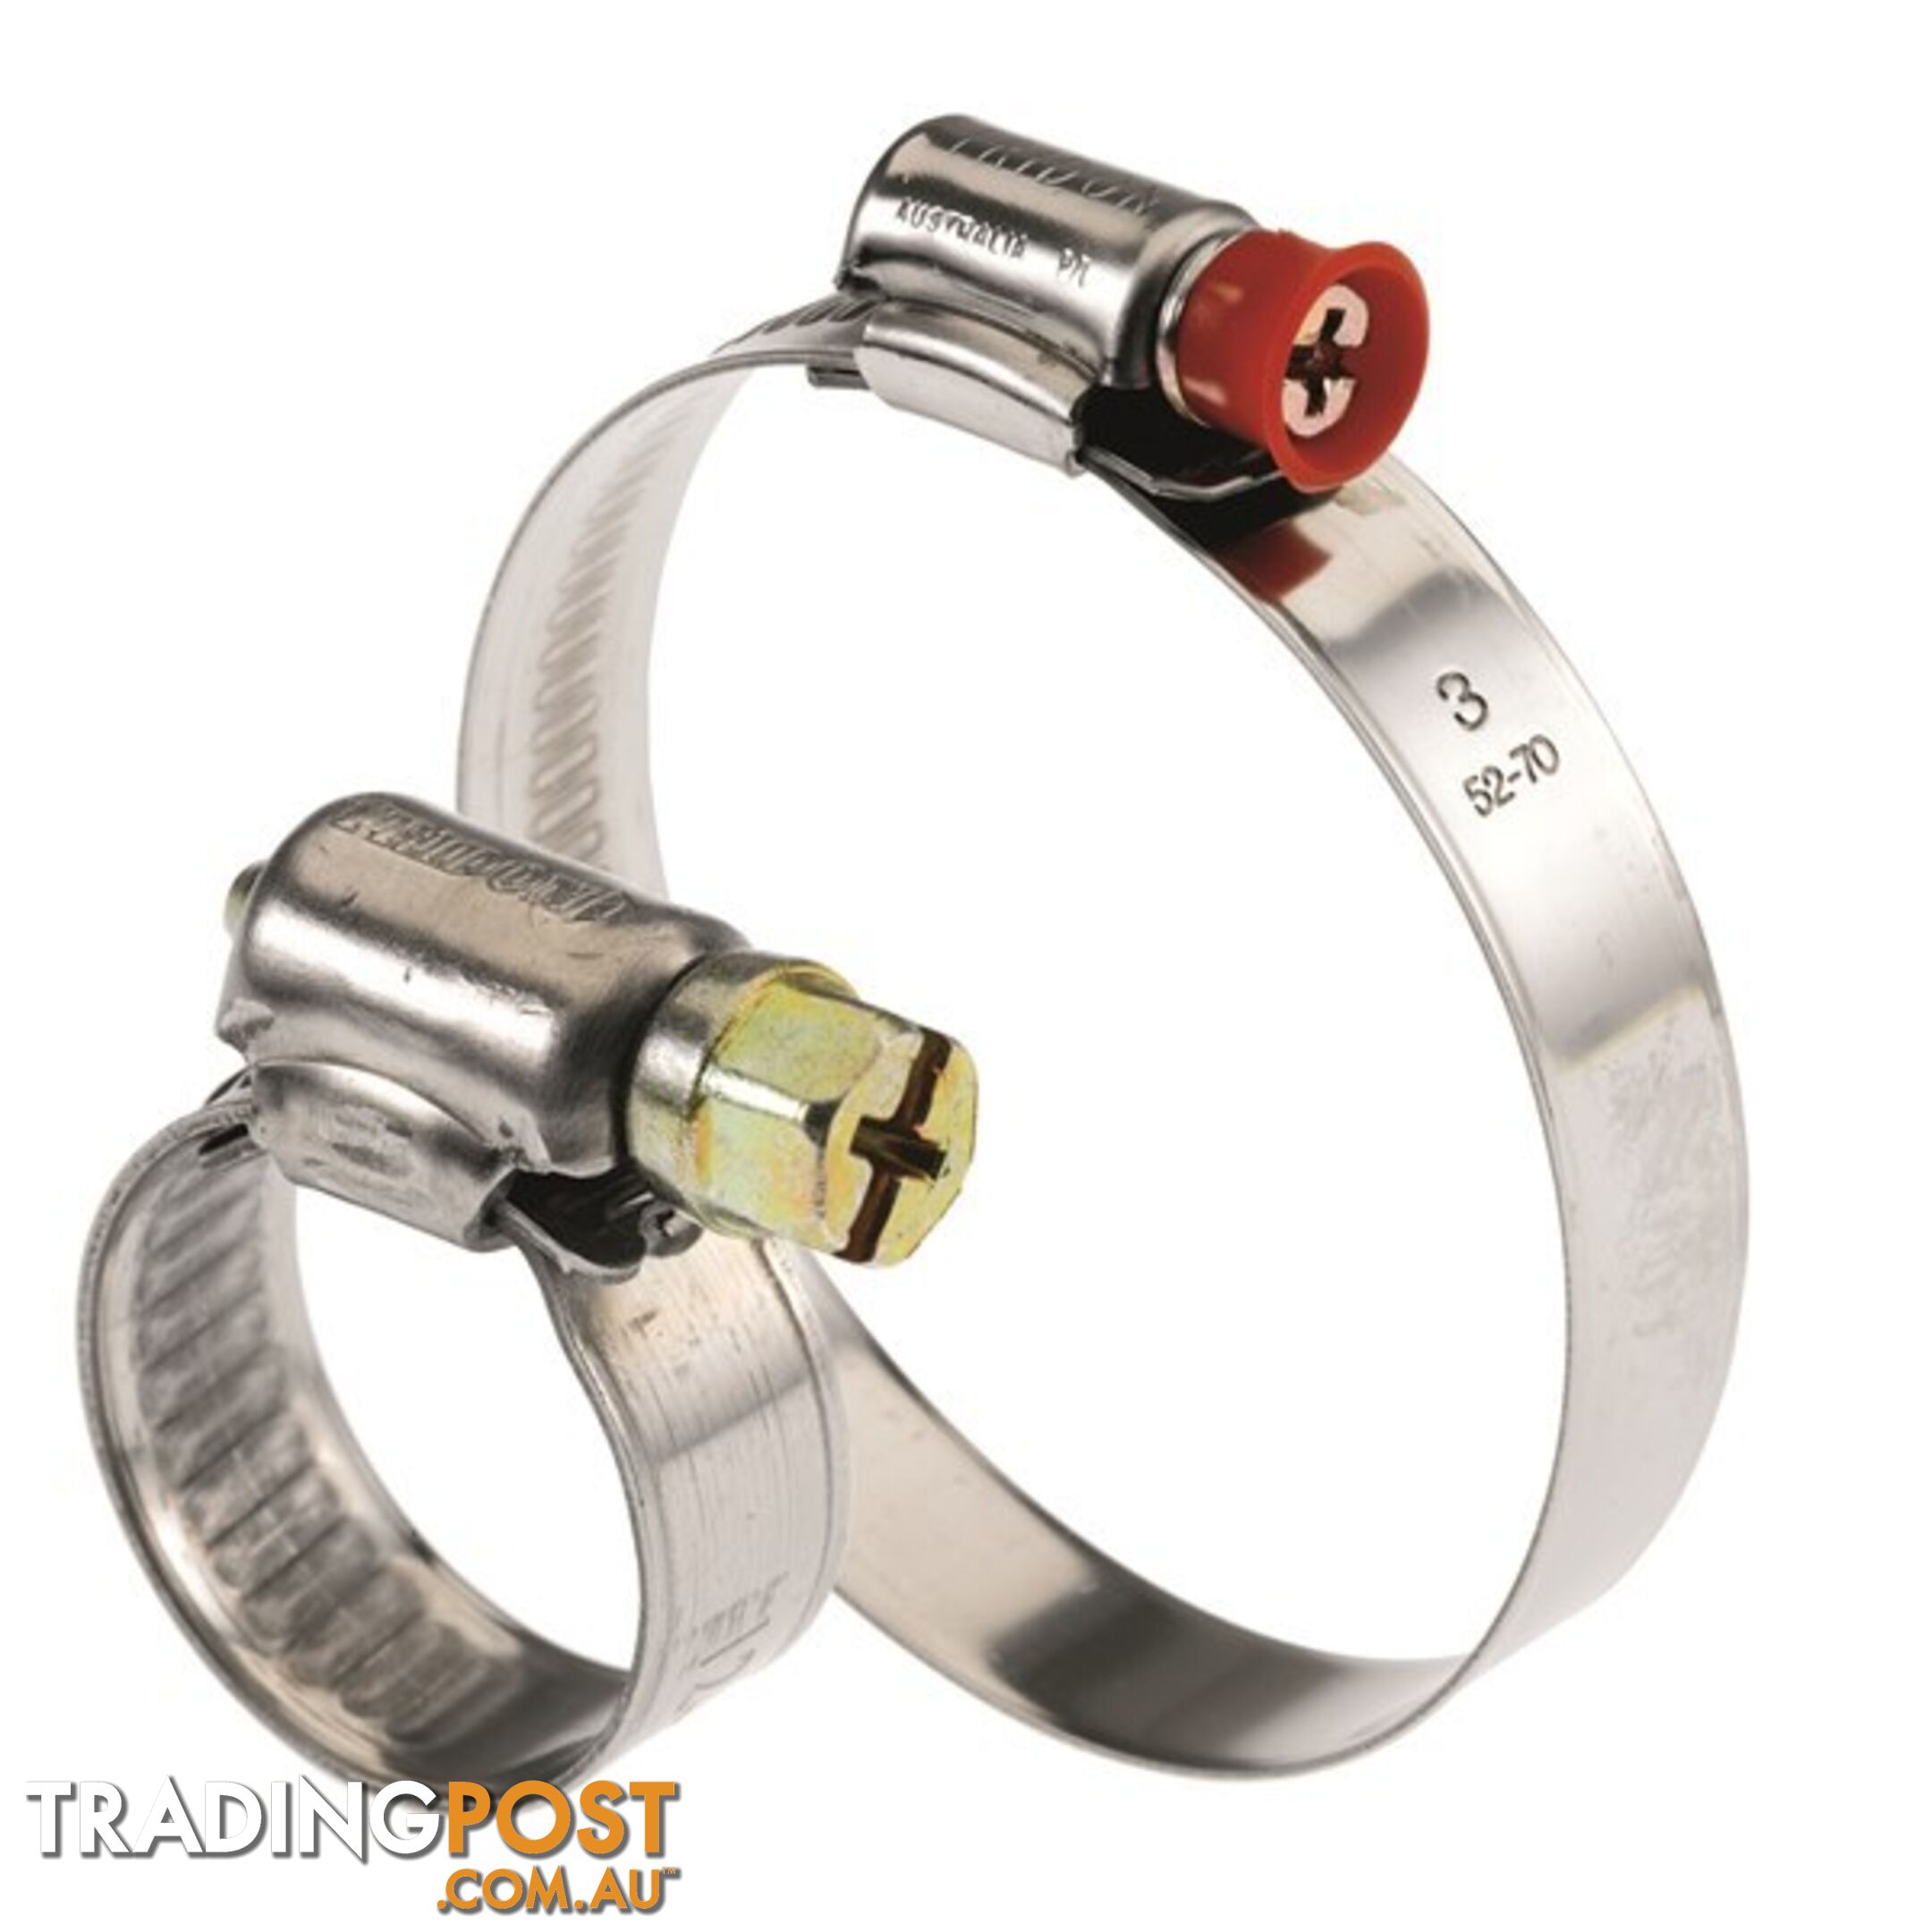 Tridon Part SS Hose Clamp 85mm-110mm Solid Band Collared 10pk SKU - MPC5P